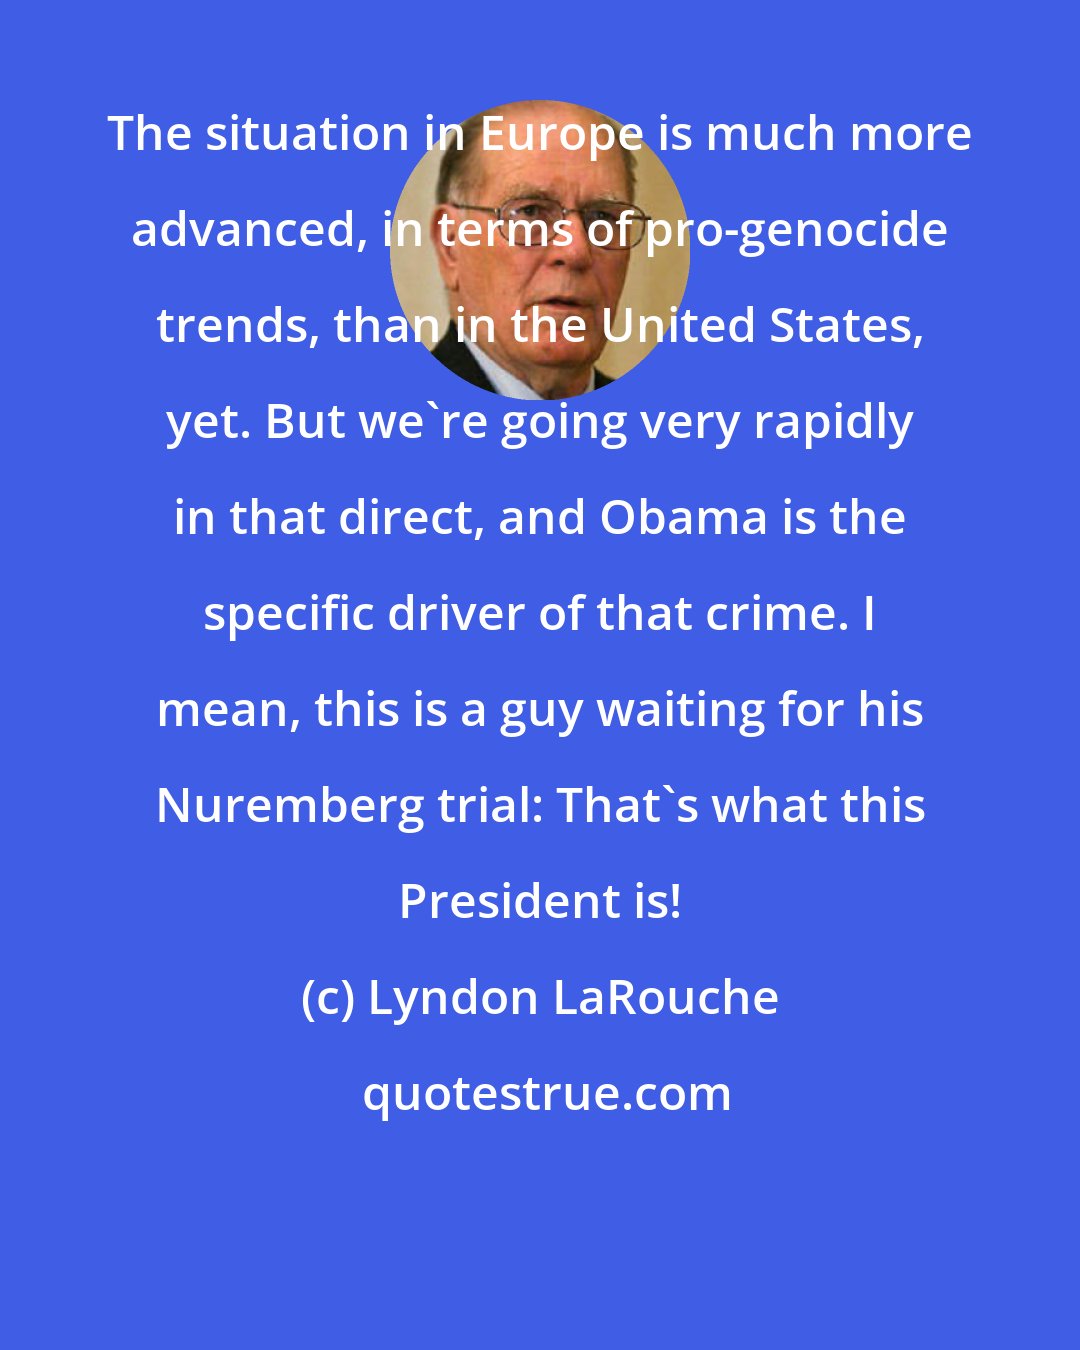 Lyndon LaRouche: The situation in Europe is much more advanced, in terms of pro-genocide trends, than in the United States, yet. But we're going very rapidly in that direct, and Obama is the specific driver of that crime. I mean, this is a guy waiting for his Nuremberg trial: That's what this President is!